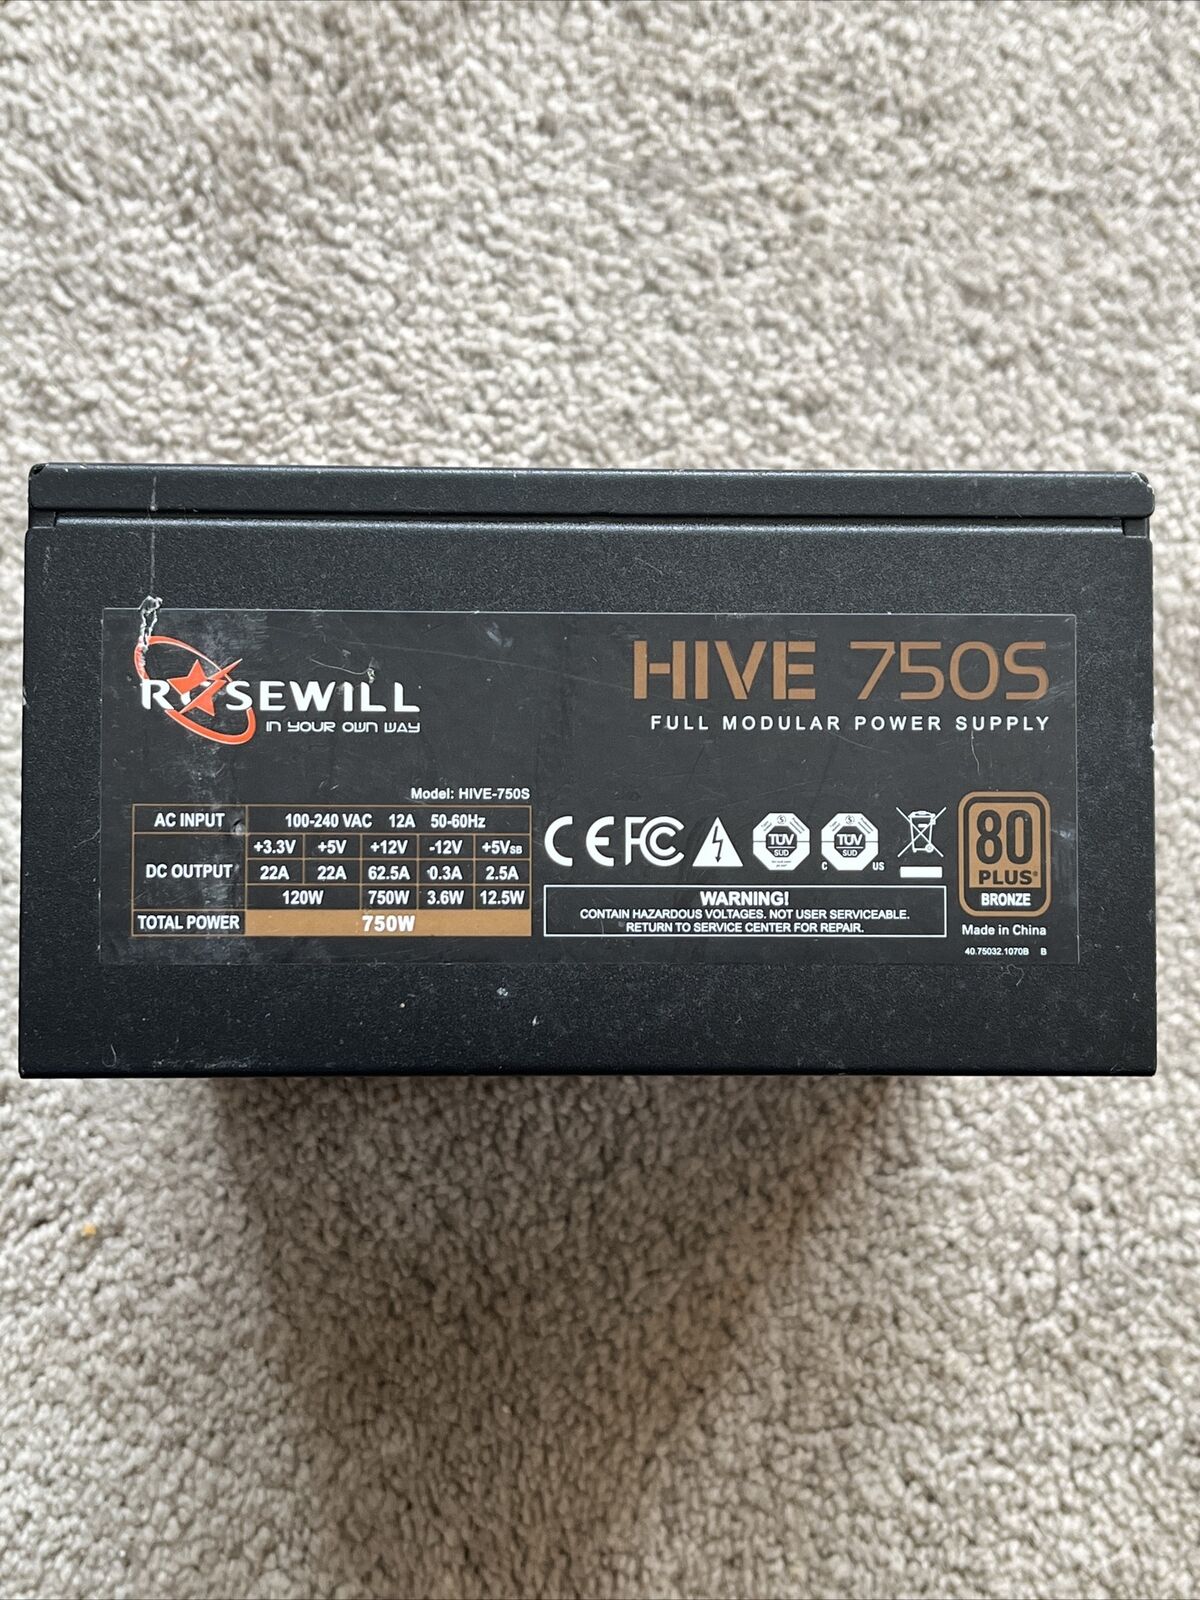 Rosewill Hive 750s Full modular power supply